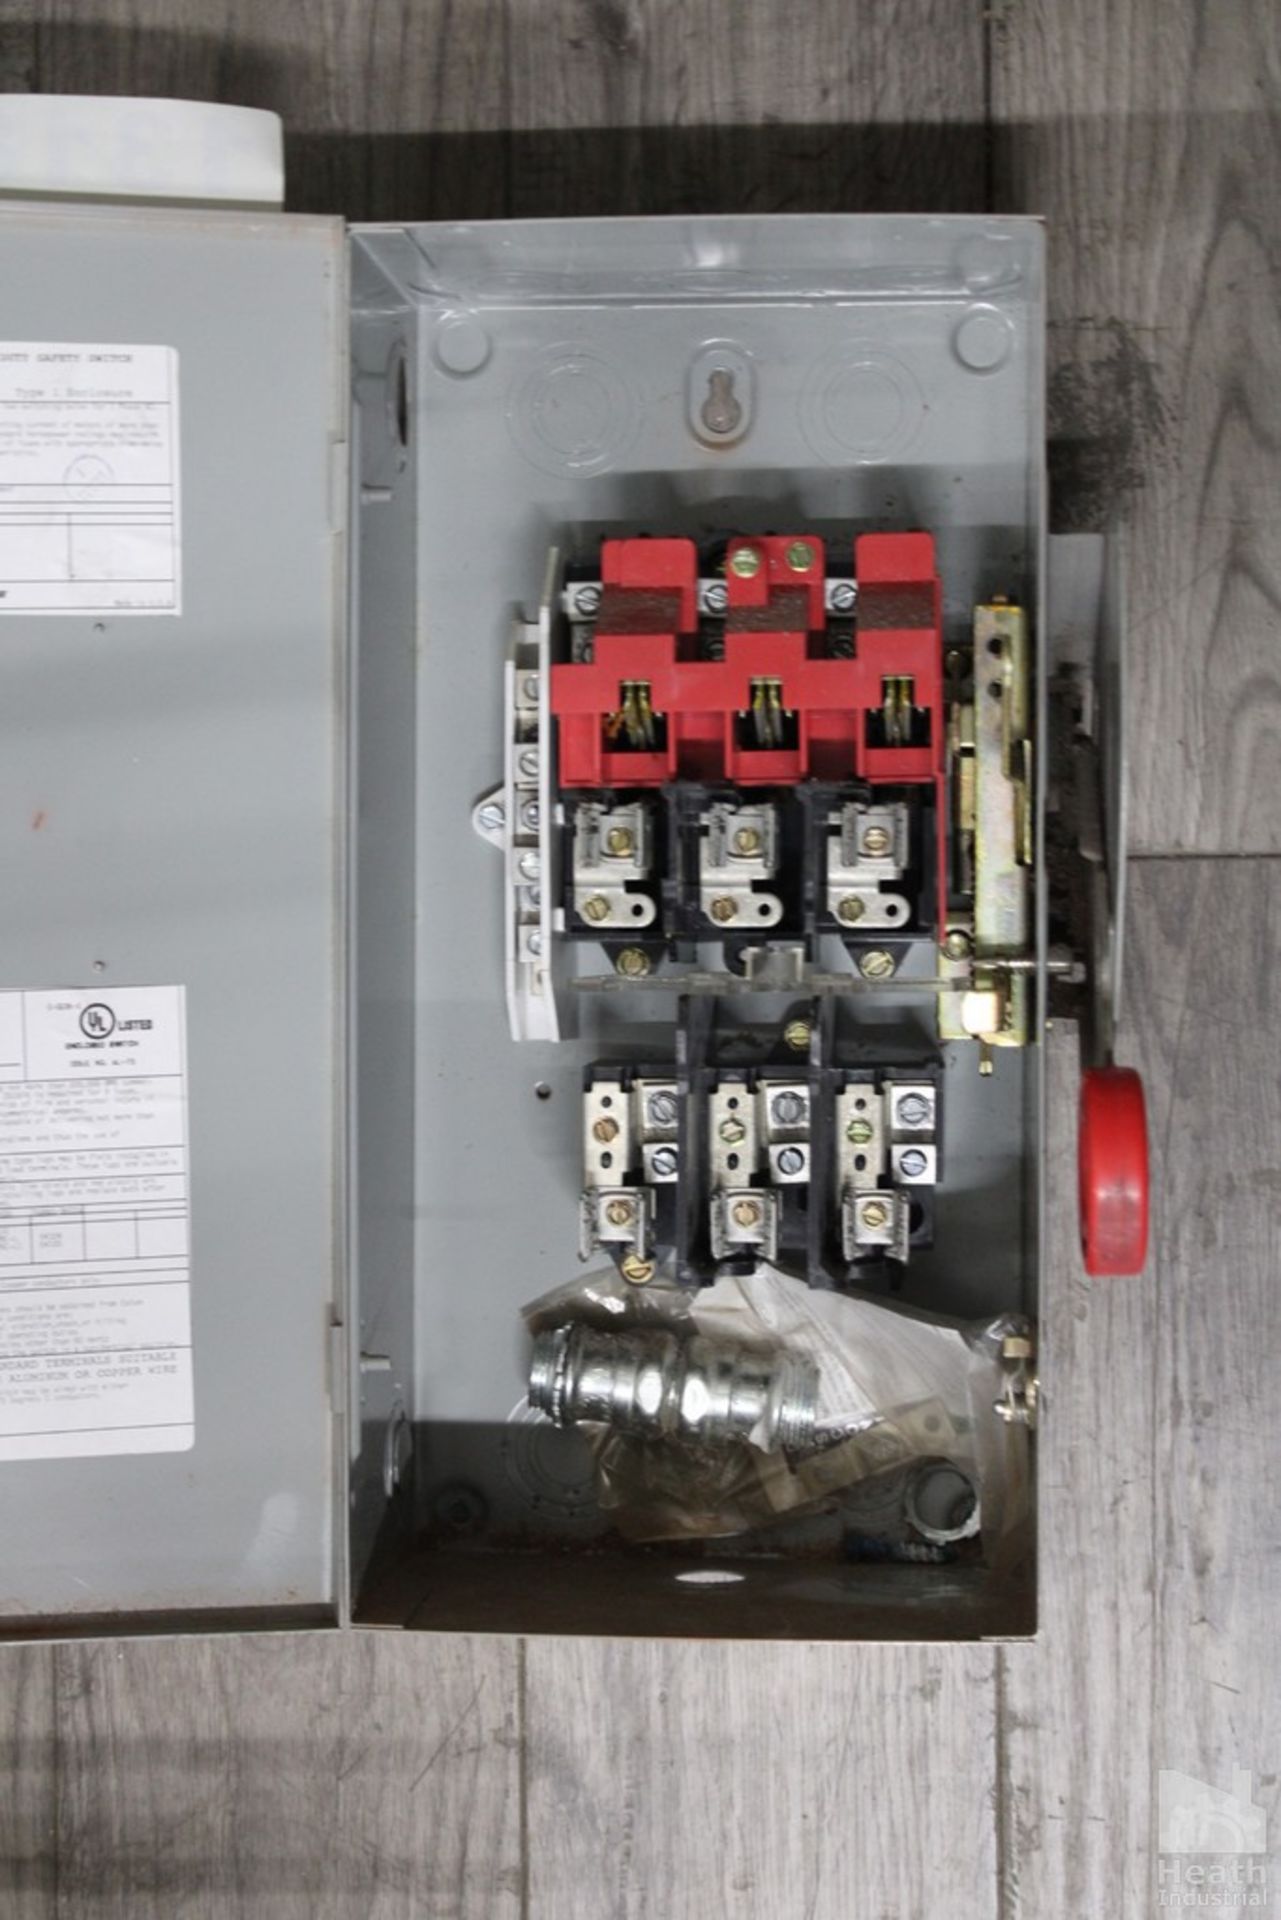 EATON HEAVY DUTY SAFETY SWITCH, MODEL DH361NGK, 30AMP - Image 2 of 2